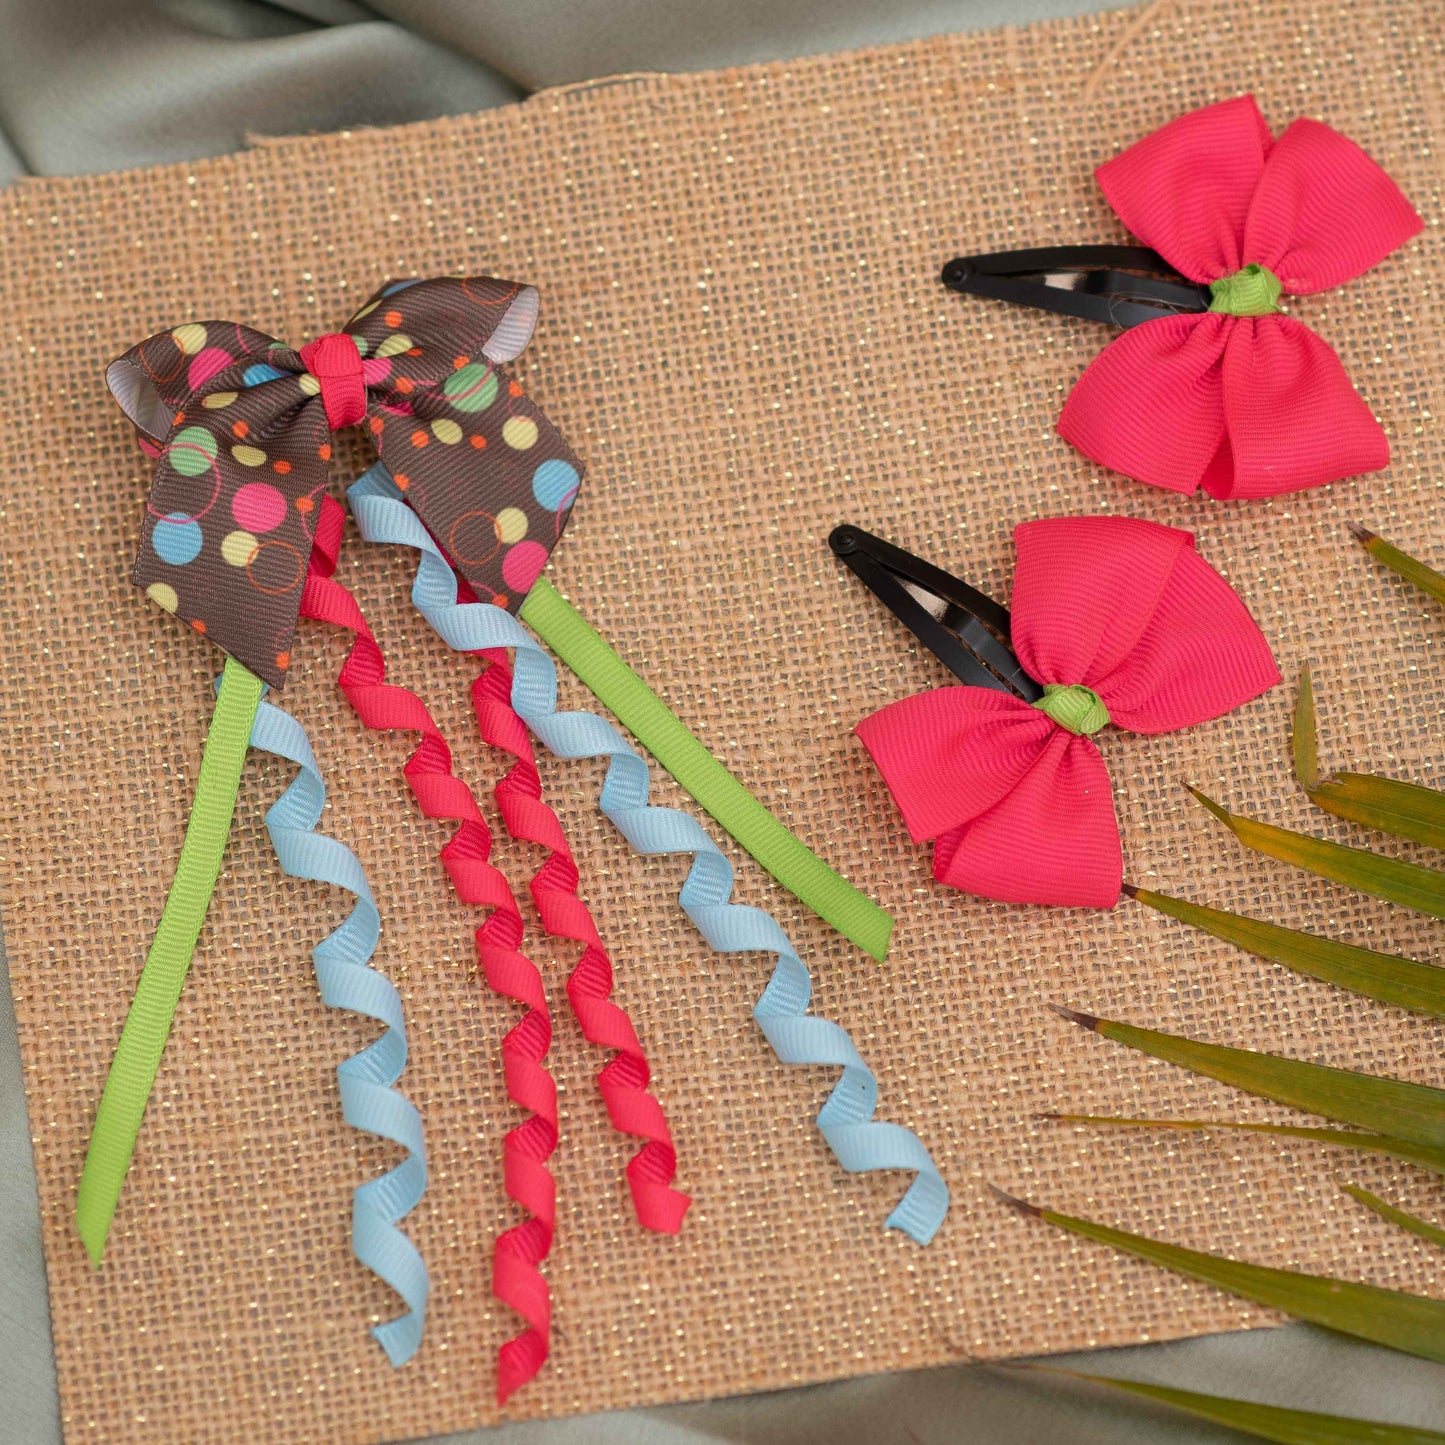 Combo: Cute dangler on alligator clip along with cute and fancy bow on tic-tac pins - Pink, Brown and Blue (Set of 1 pairs, 1 single bow  3 quantity)